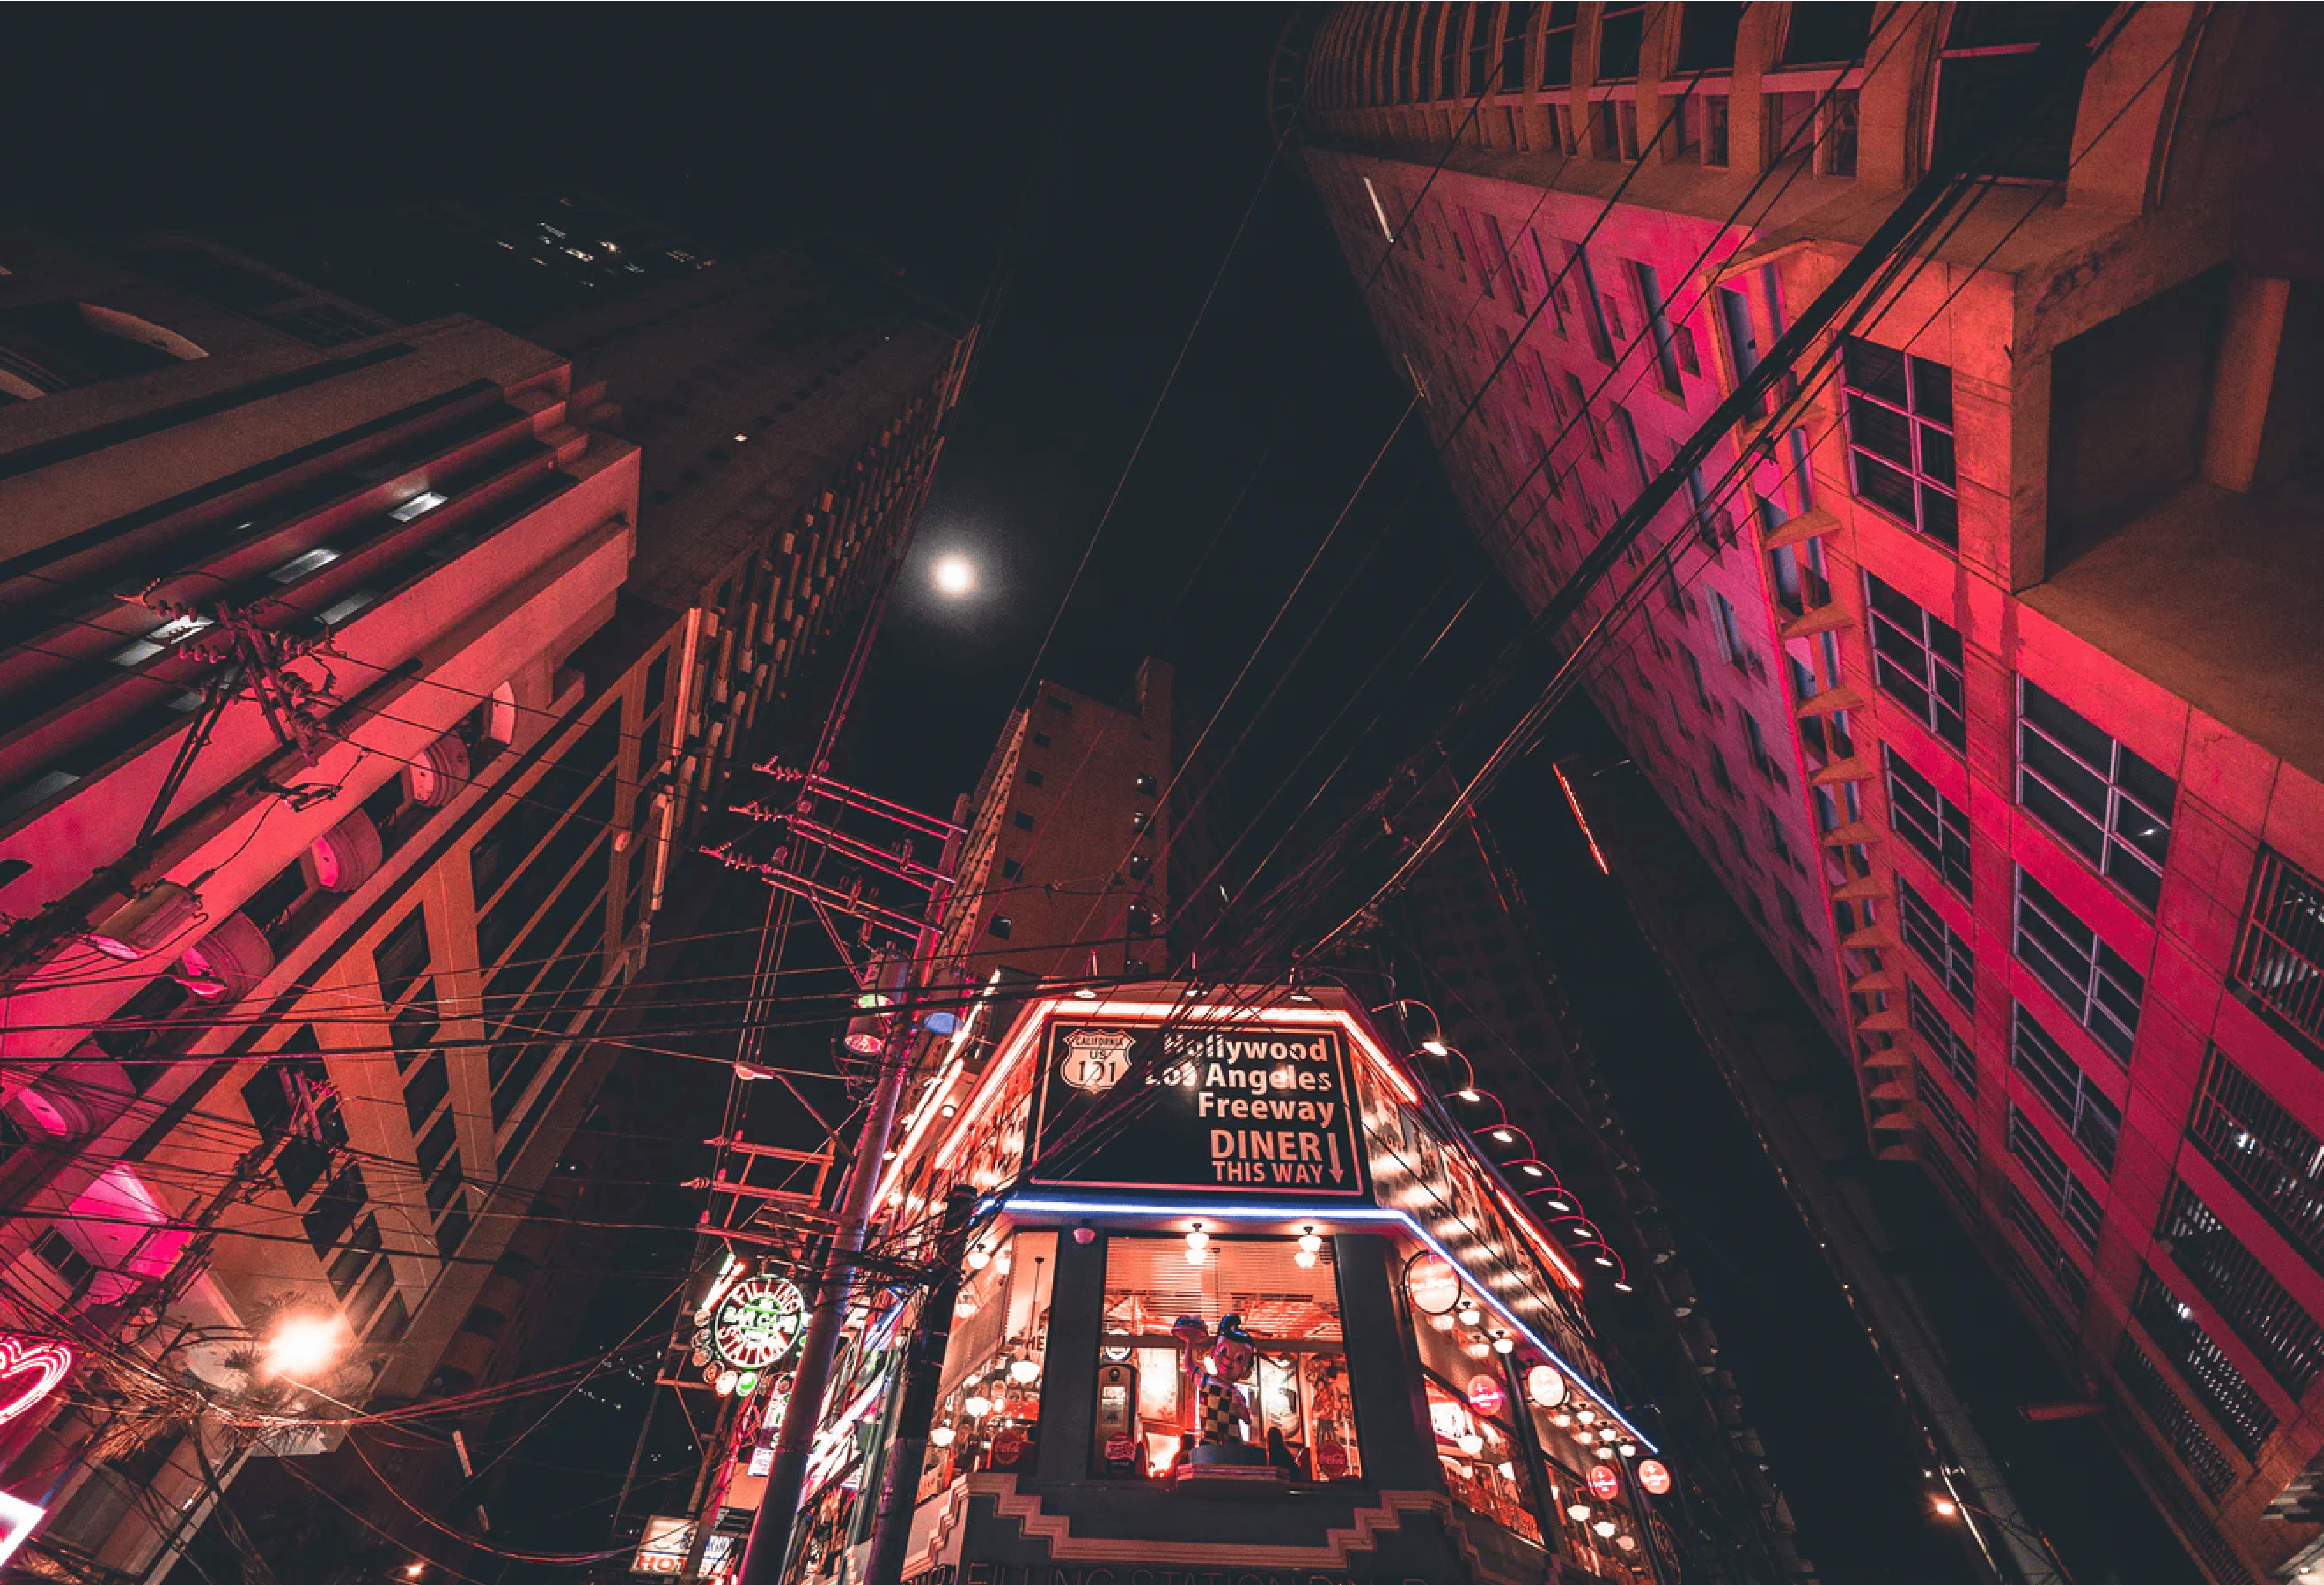 Image of Amsterdam's Red Light District at Night